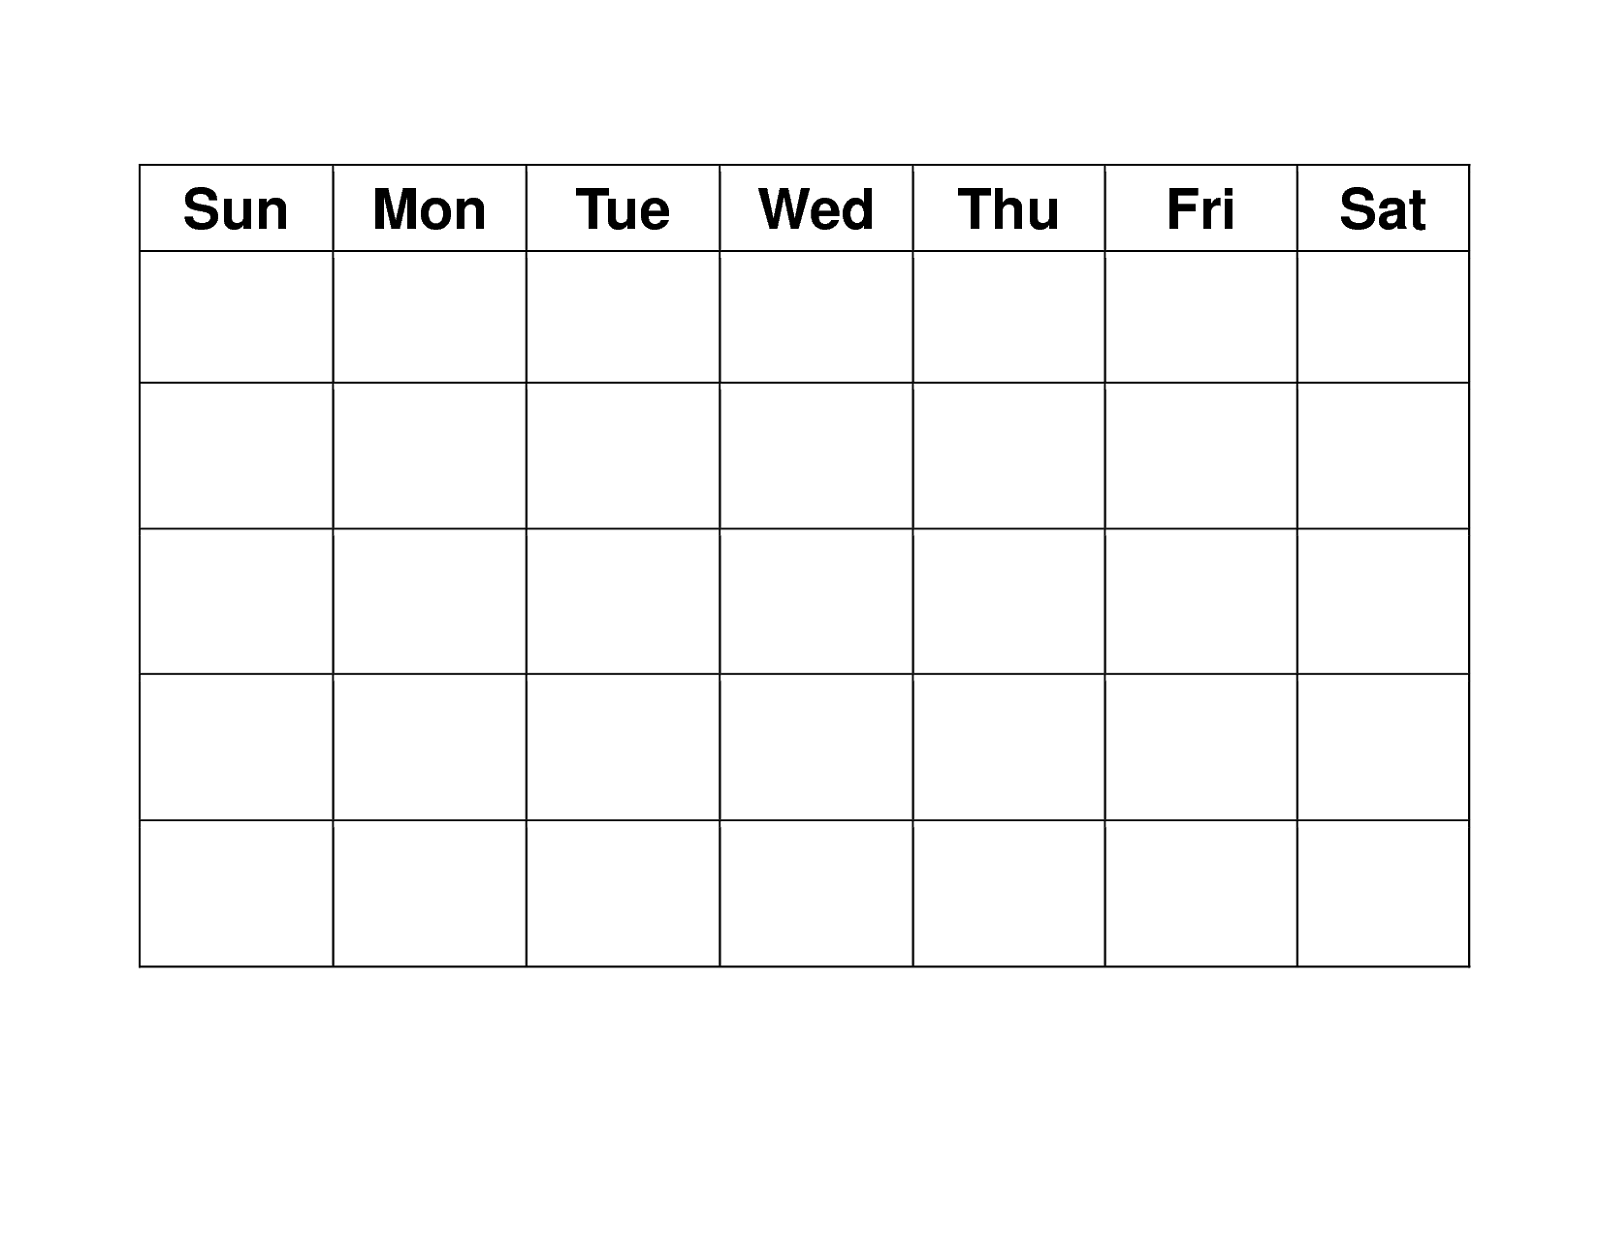 printable blank daily schedule